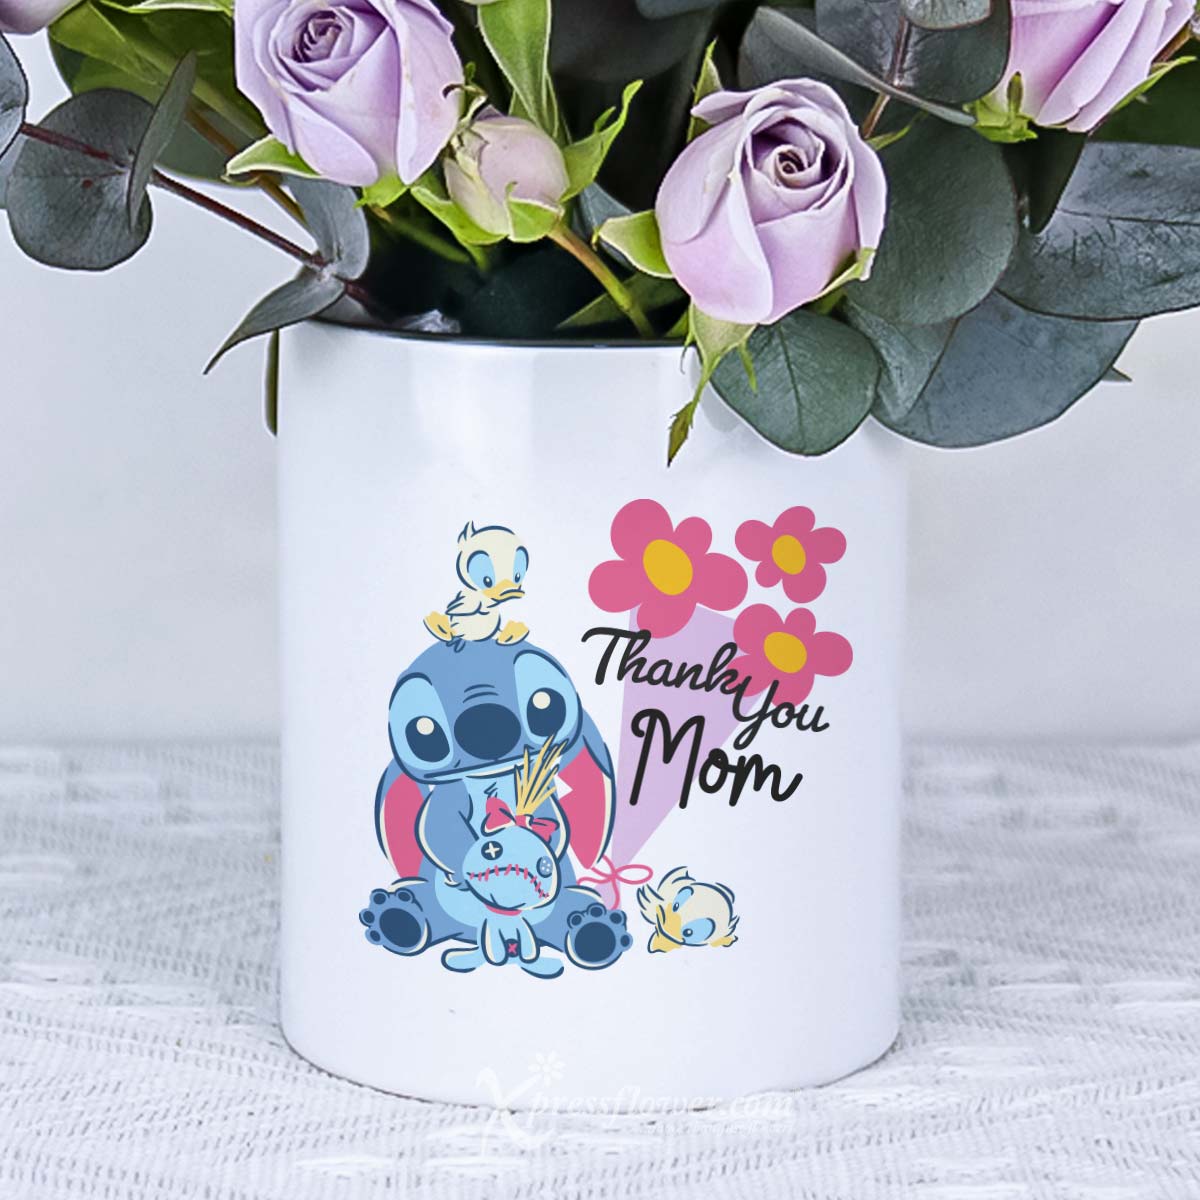 MDDS2481 Floral Harmony (6 Mix Pink Carnations with Disney Stitch "Thank You Mom" holder) 1d